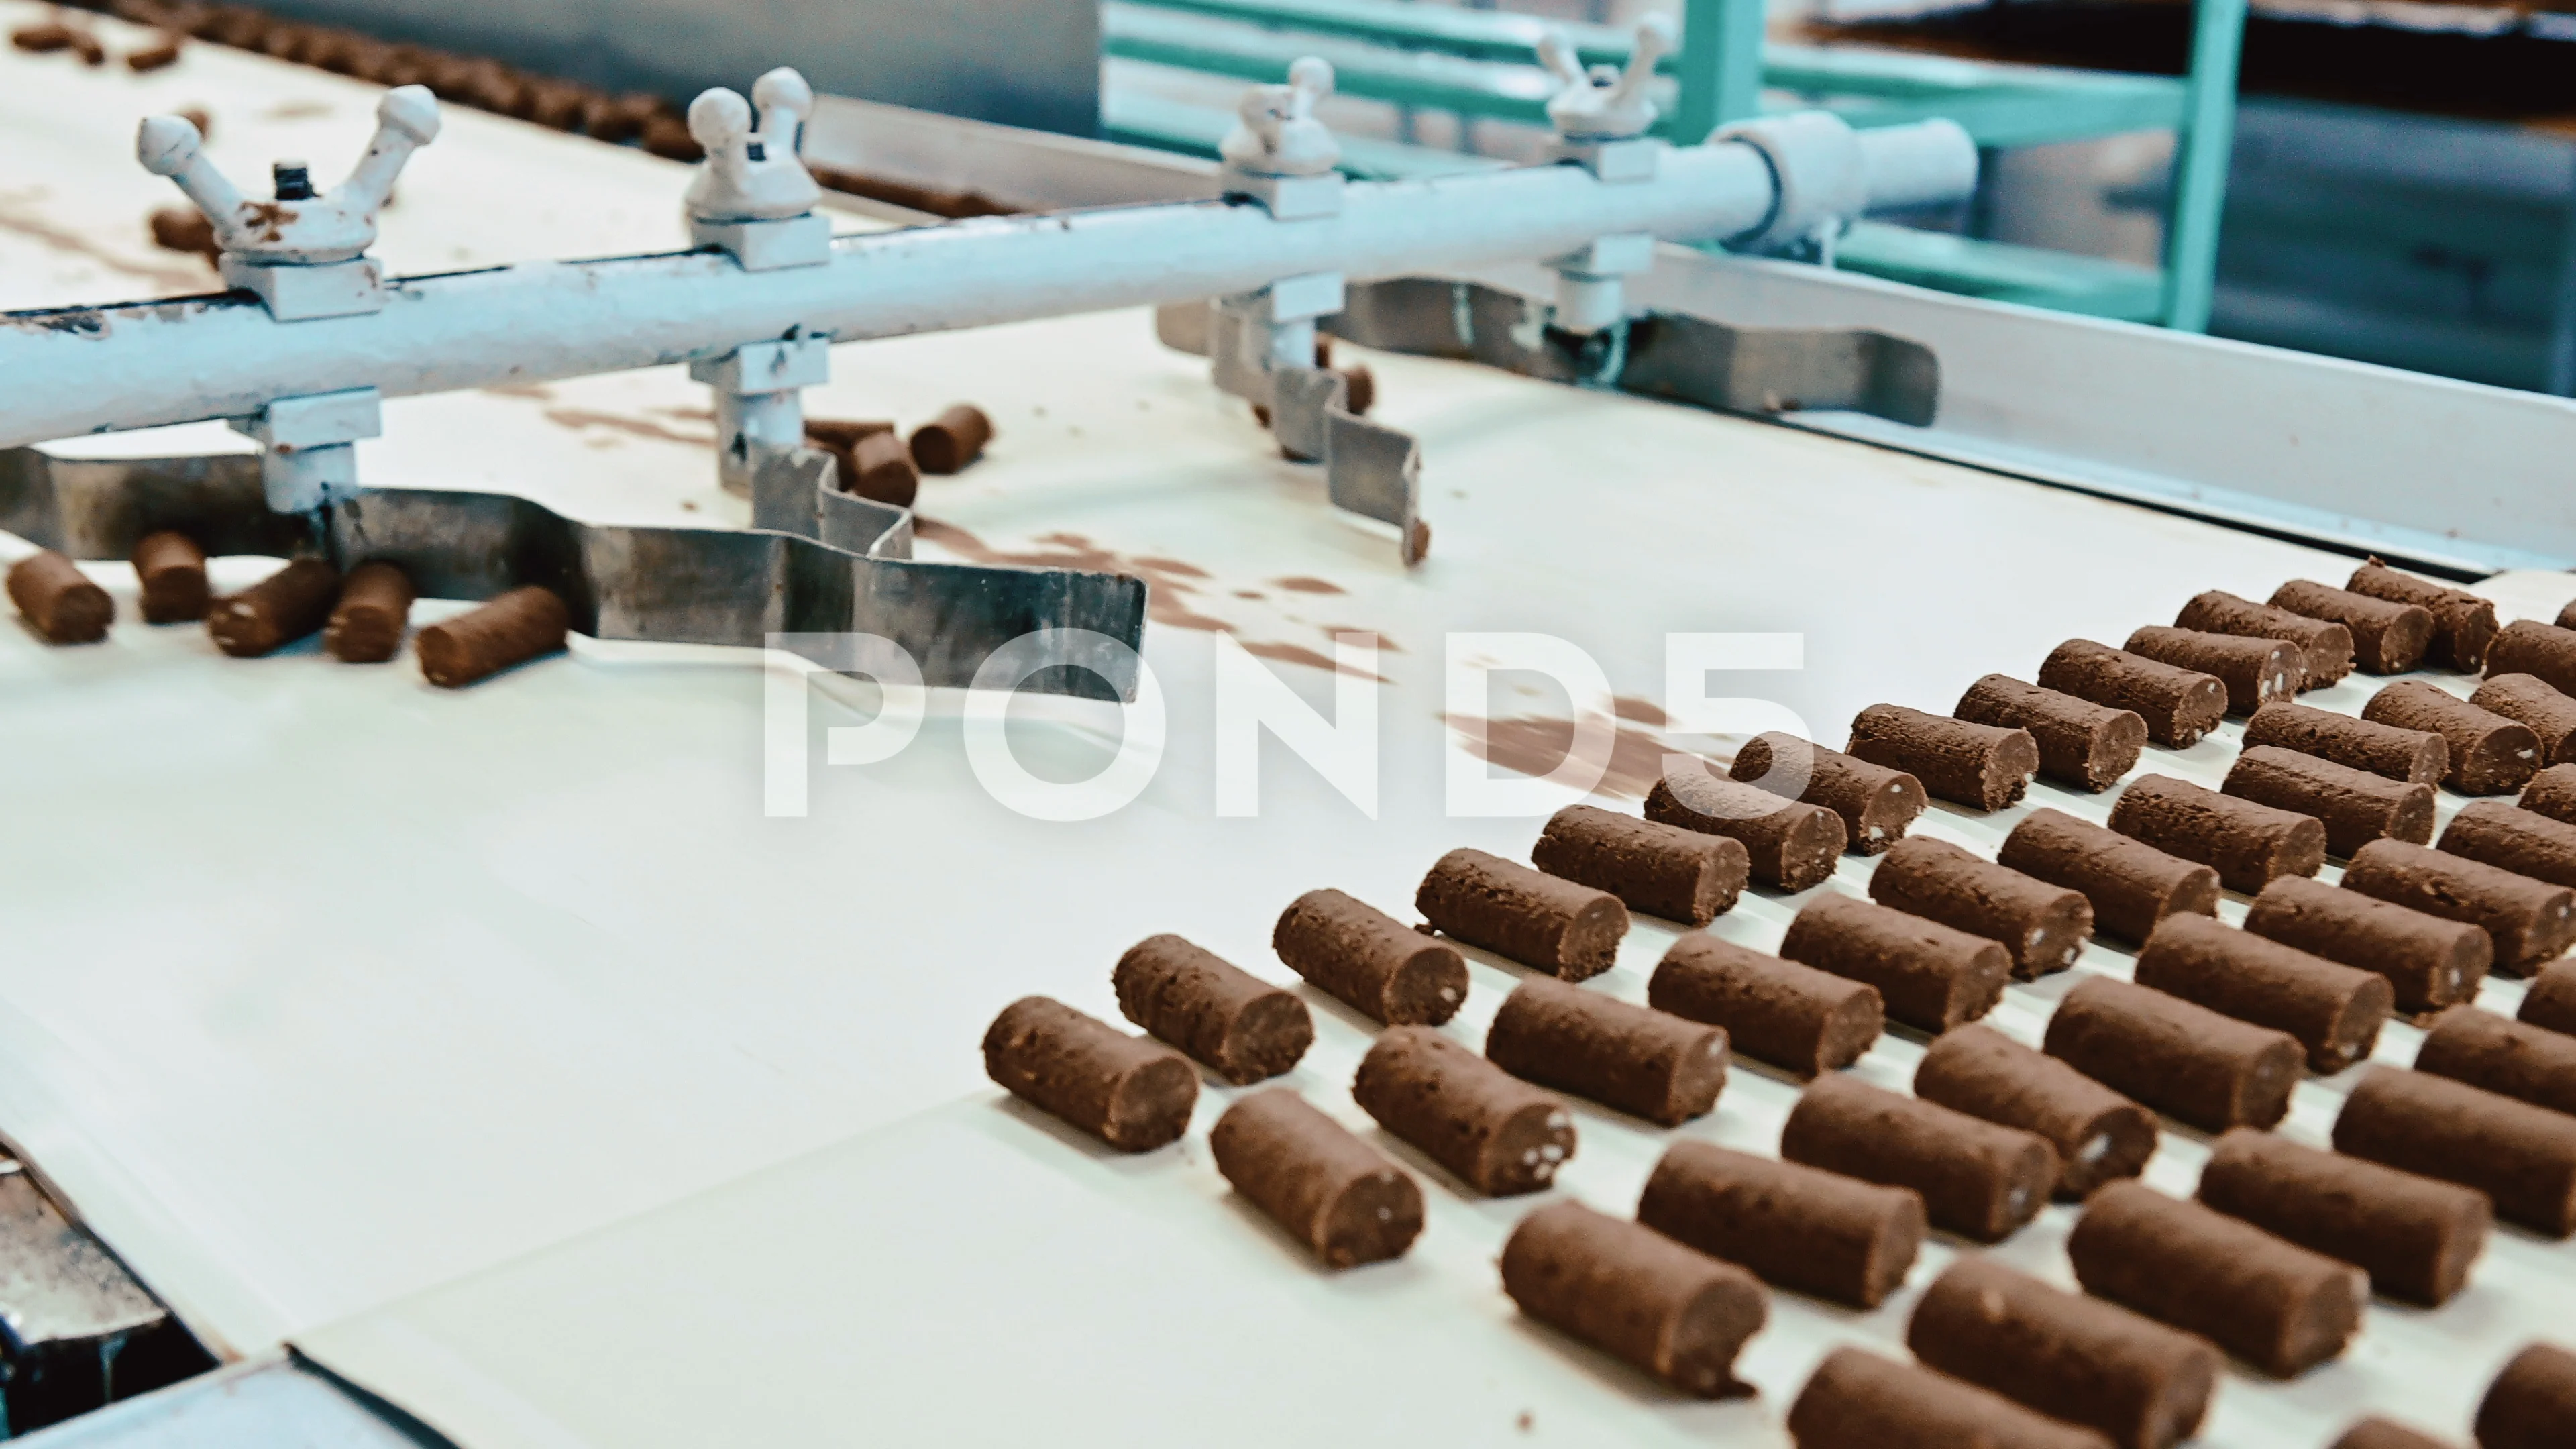 https://images.pond5.com/candy-factory-chocolate-process-making-footage-107075429_prevstill.jpeg